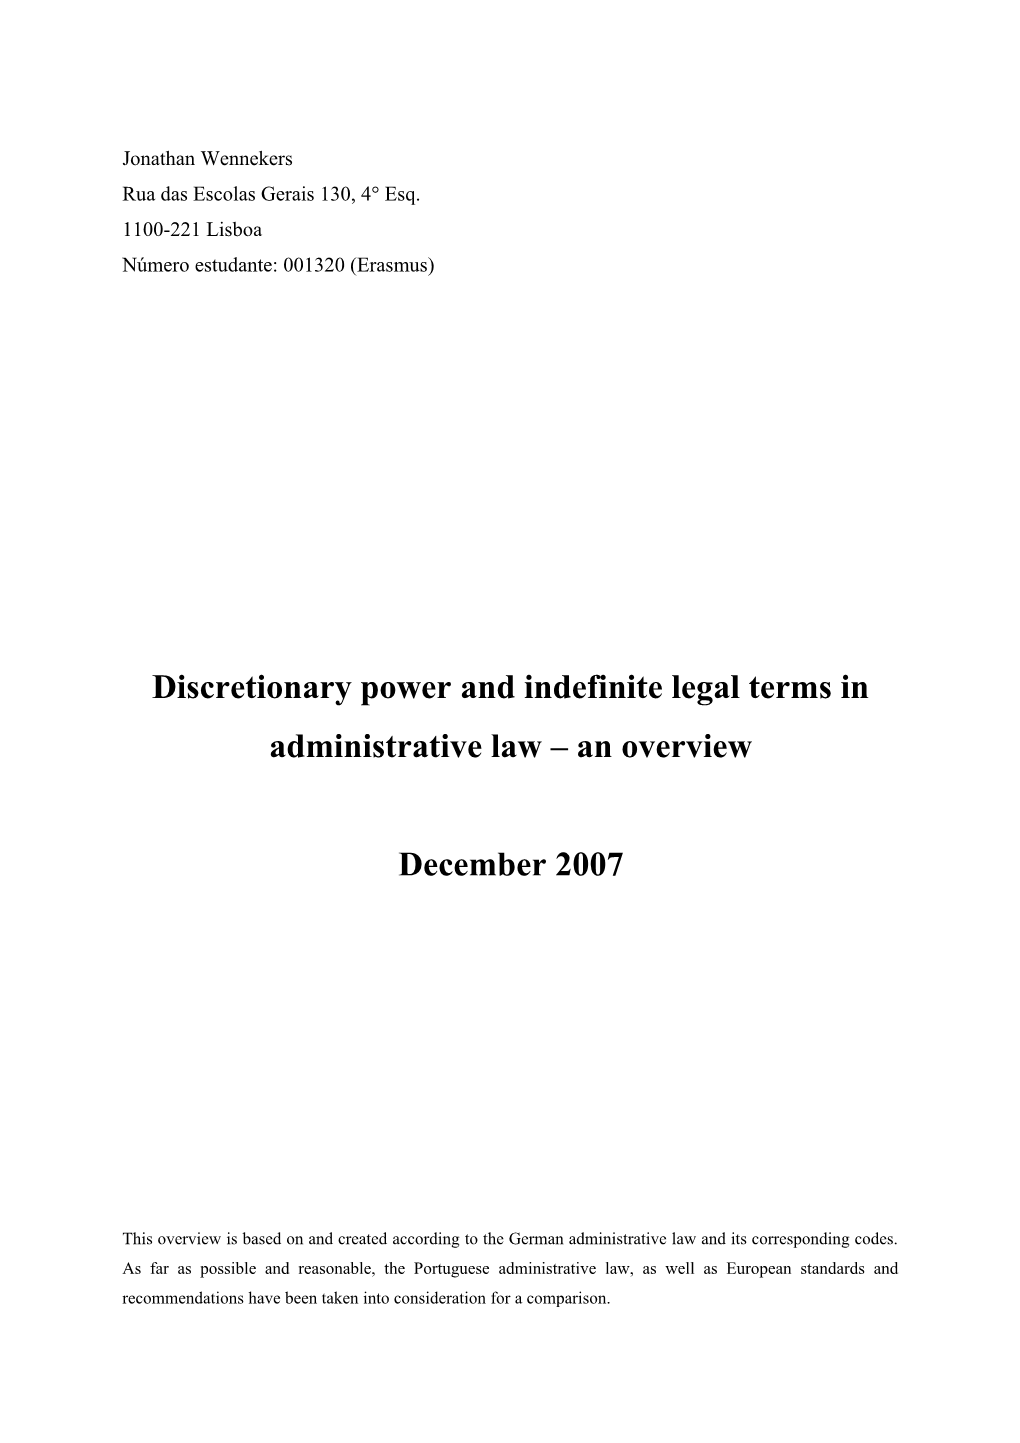 Discretionary Power and Indefinitelegal Terms in Administrative Law an Overview